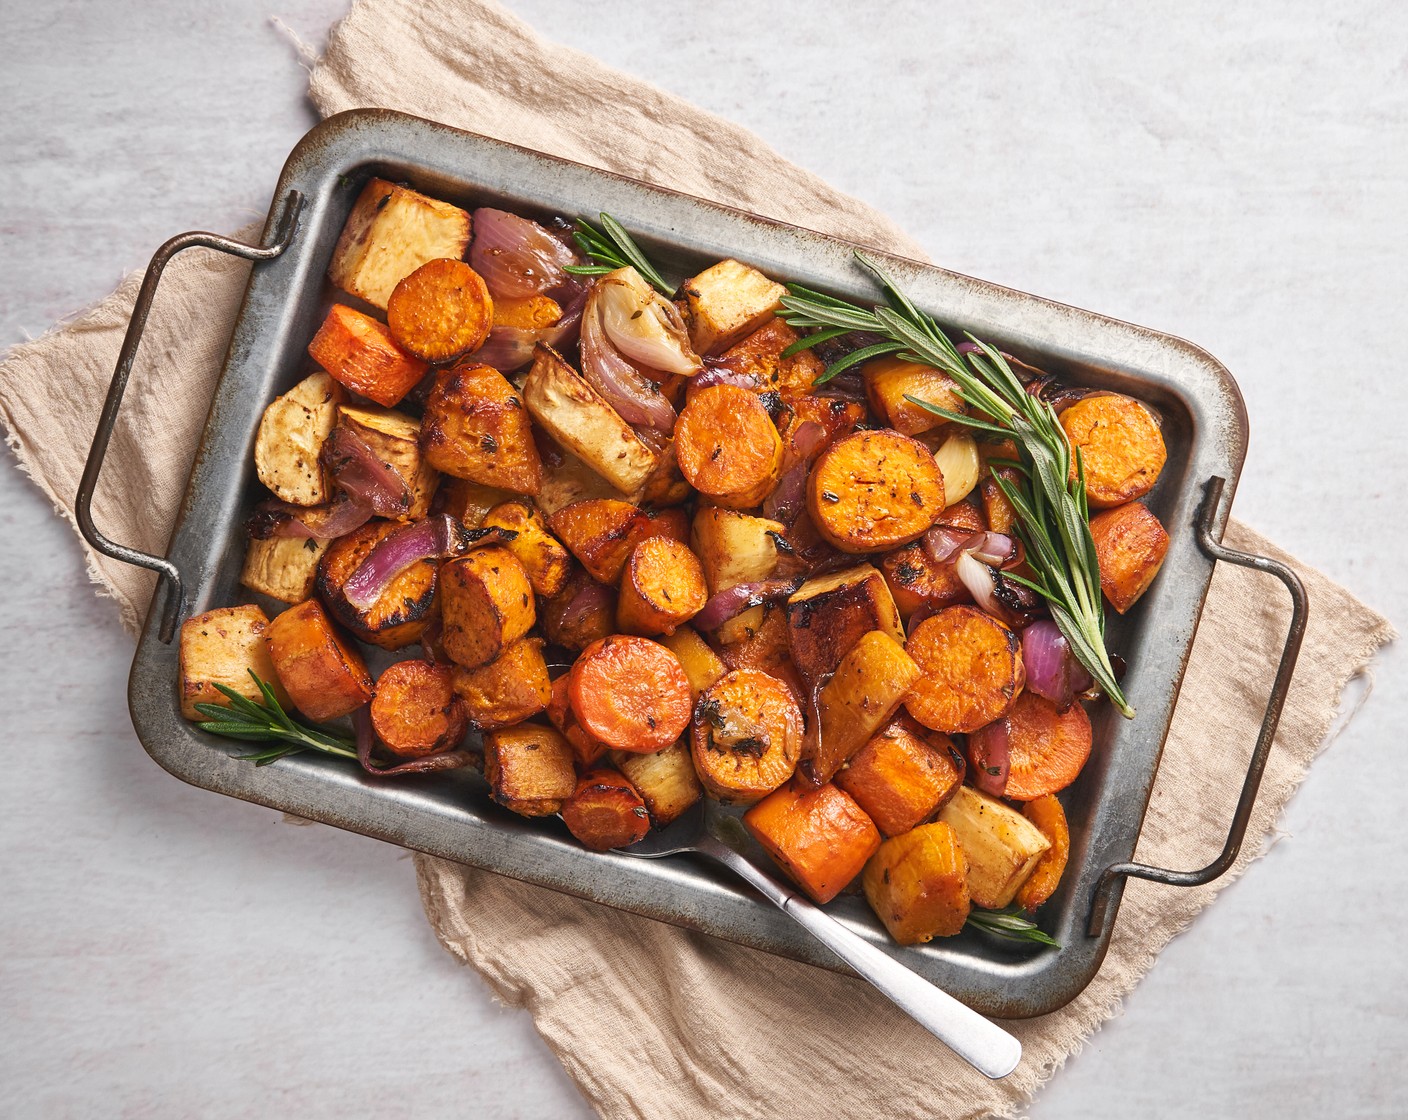 Balsamic Roasted Root Vegetables